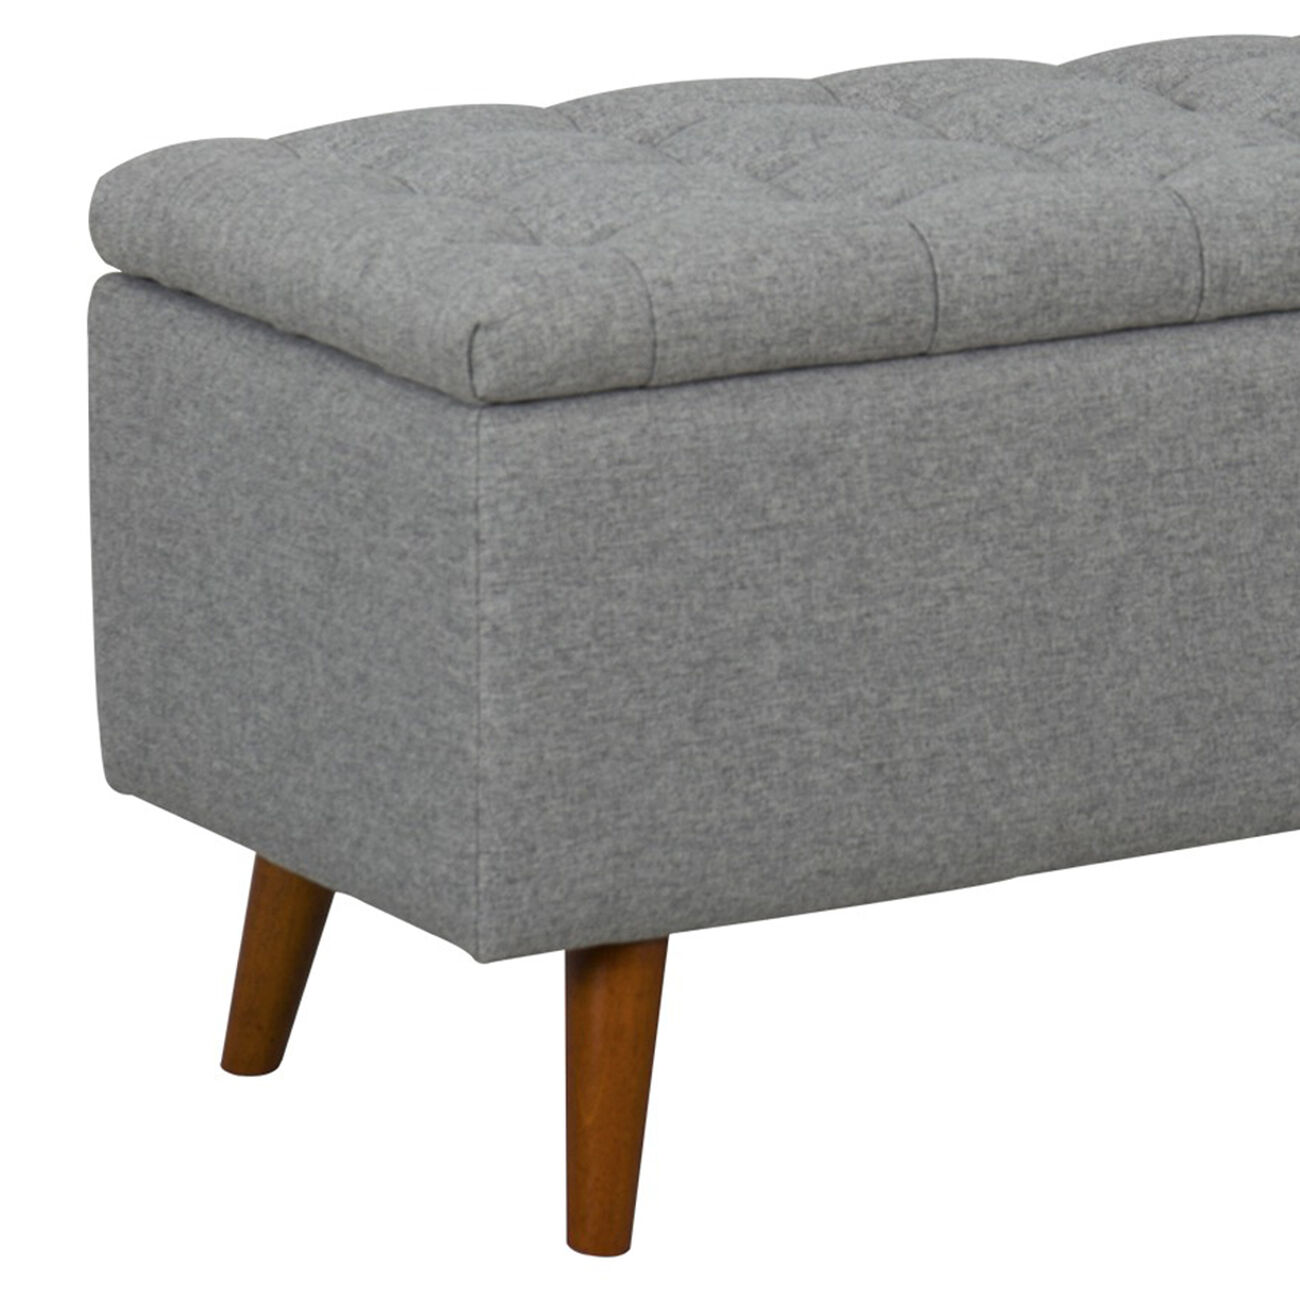 Tufted Storage Bench With Button Tufted Top, Hinged Seat Storage And Splayed Wood Feet, Light Gray